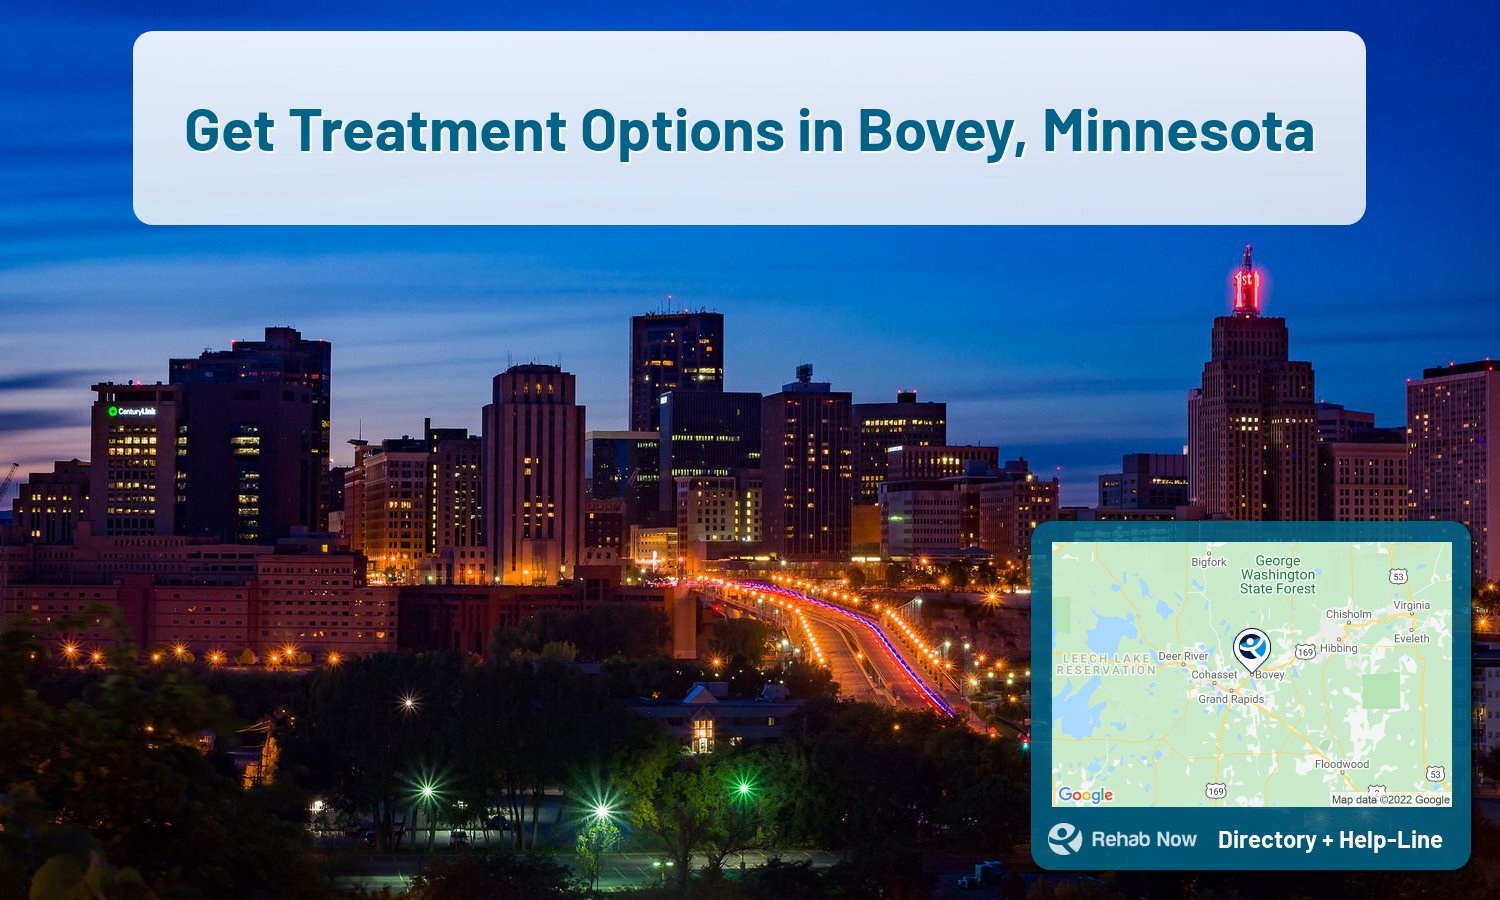 Drug rehab and alcohol treatment services near you in Bovey, Minnesota. Need help choosing a center? Call us, free.